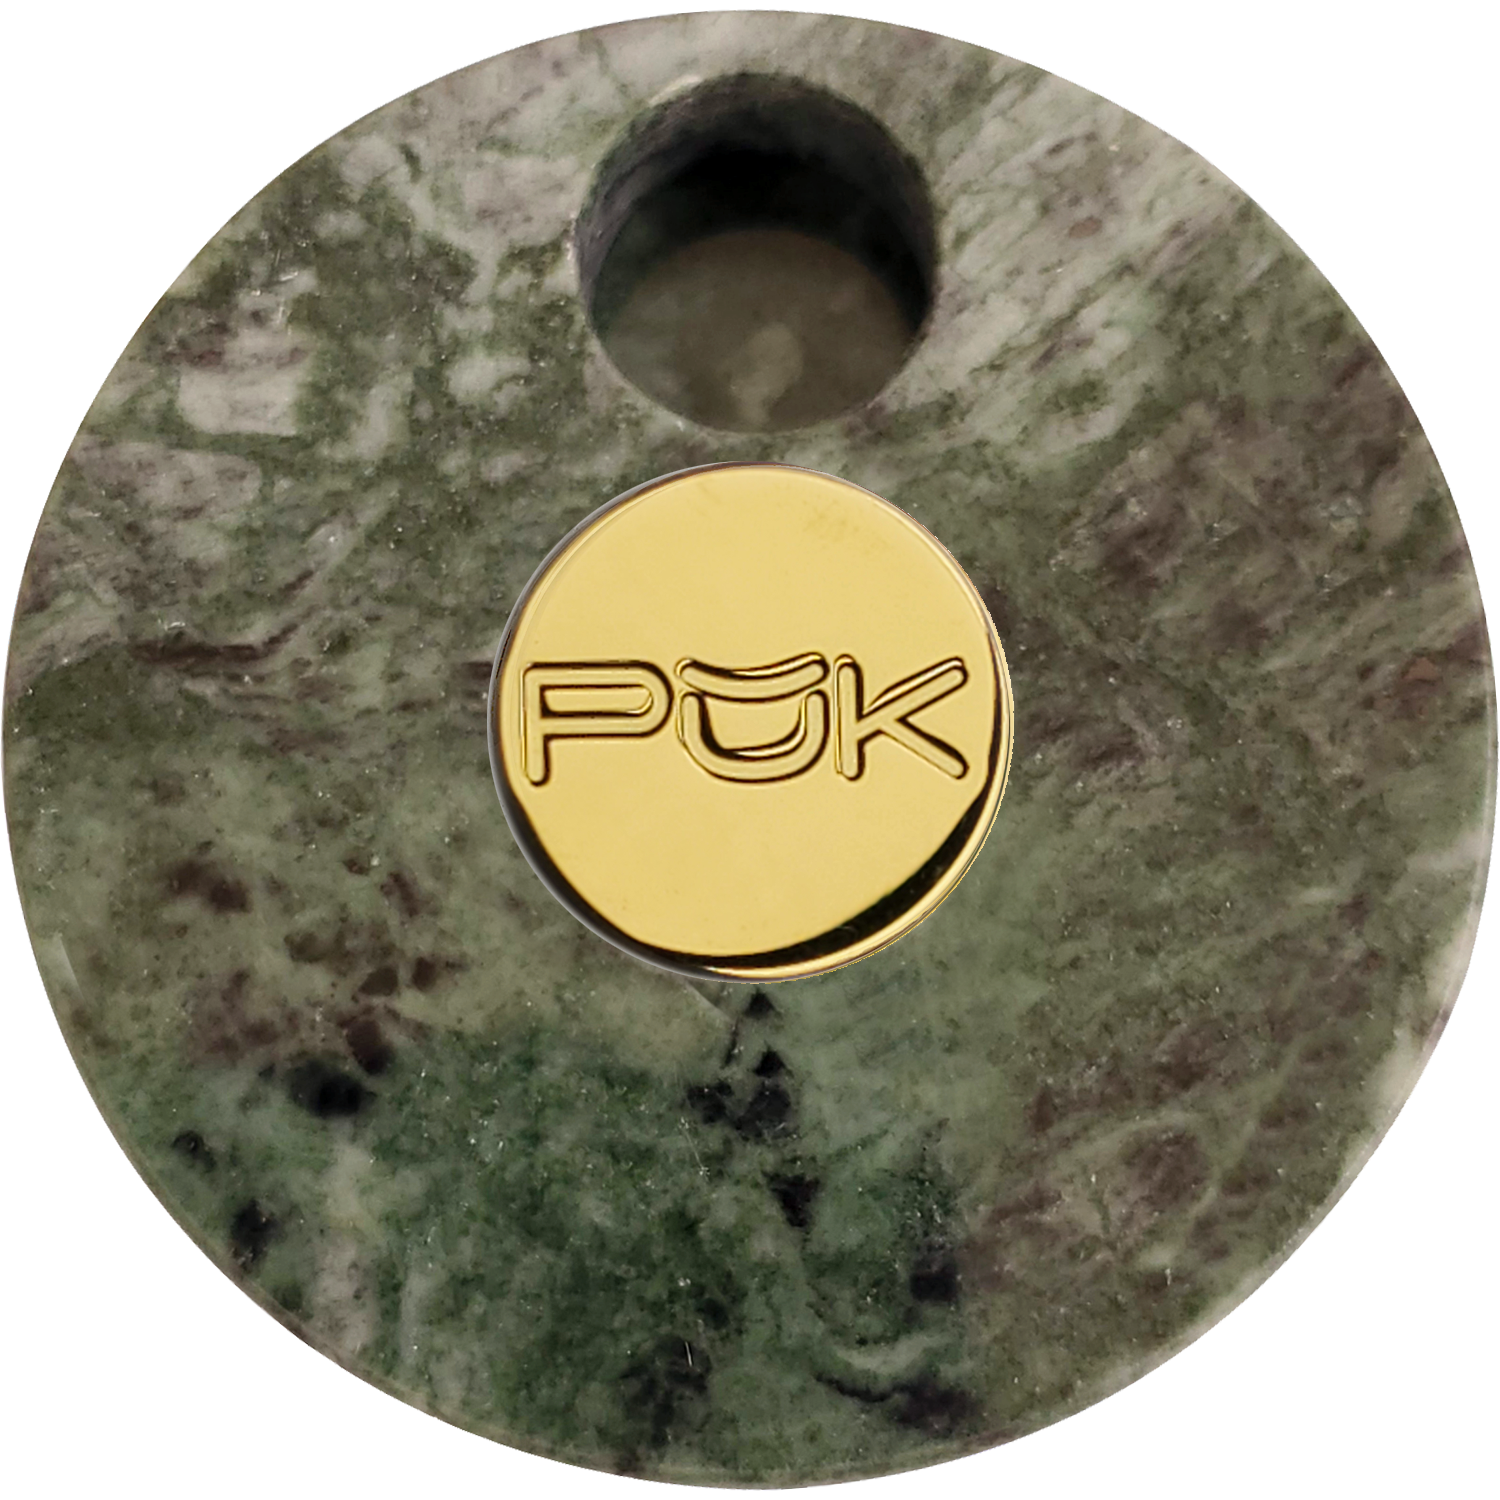  Marble PŬK Cannabis Container | PUK Smoking Device | PUK ONLINE STORE